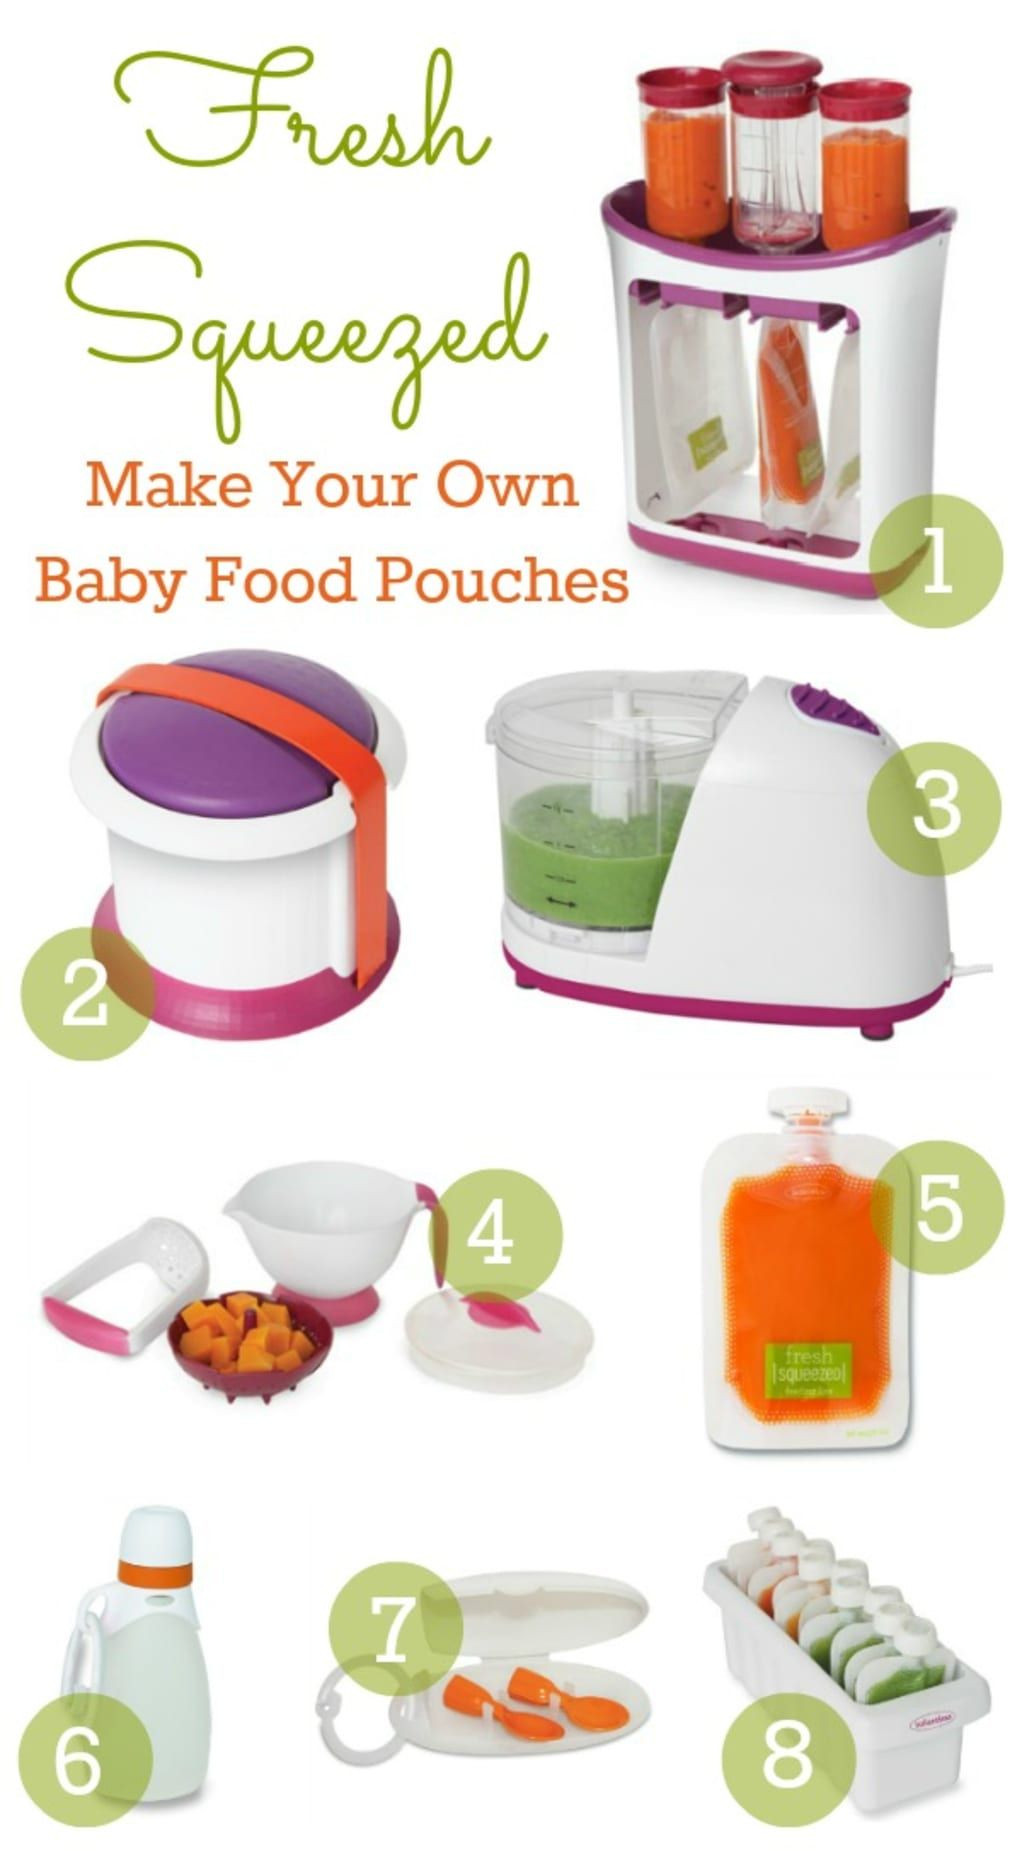 Make Your Own Baby Food Recipes
 Make Your Own Baby Food Pouches with Fresh Squeezed by